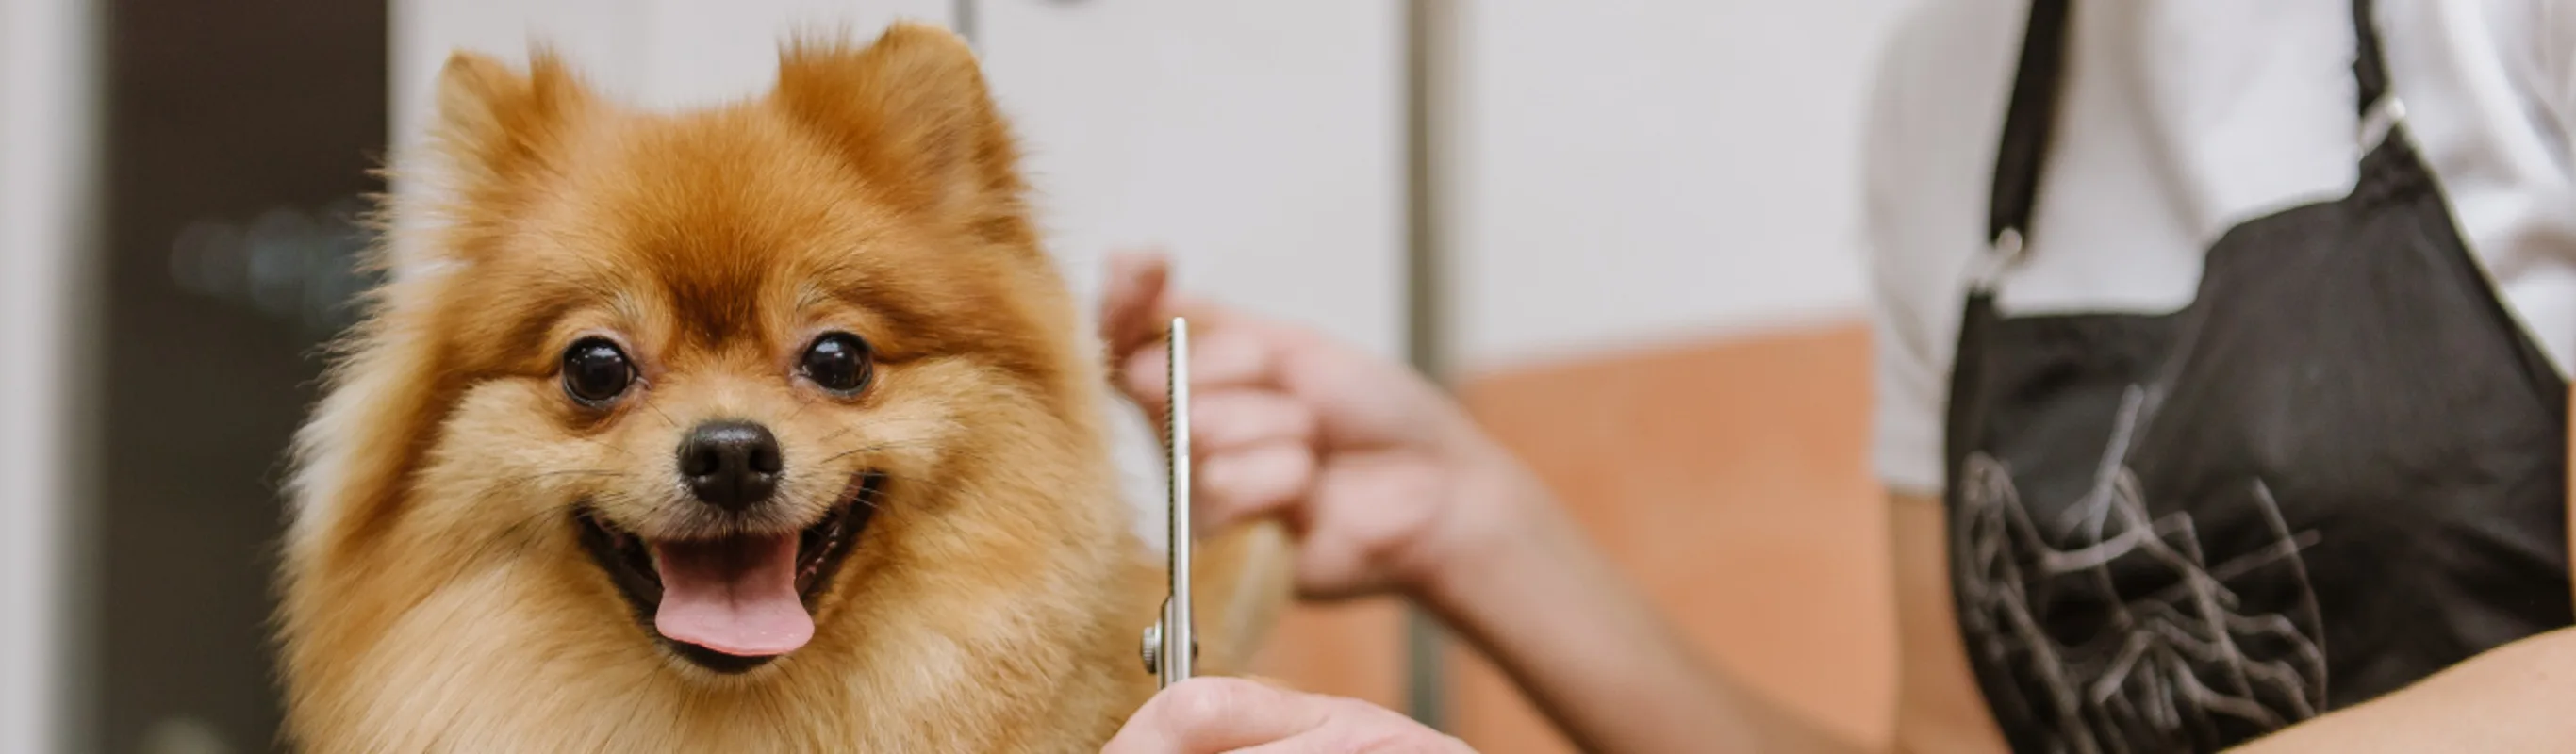 Pomeranian being groomed by a groomer